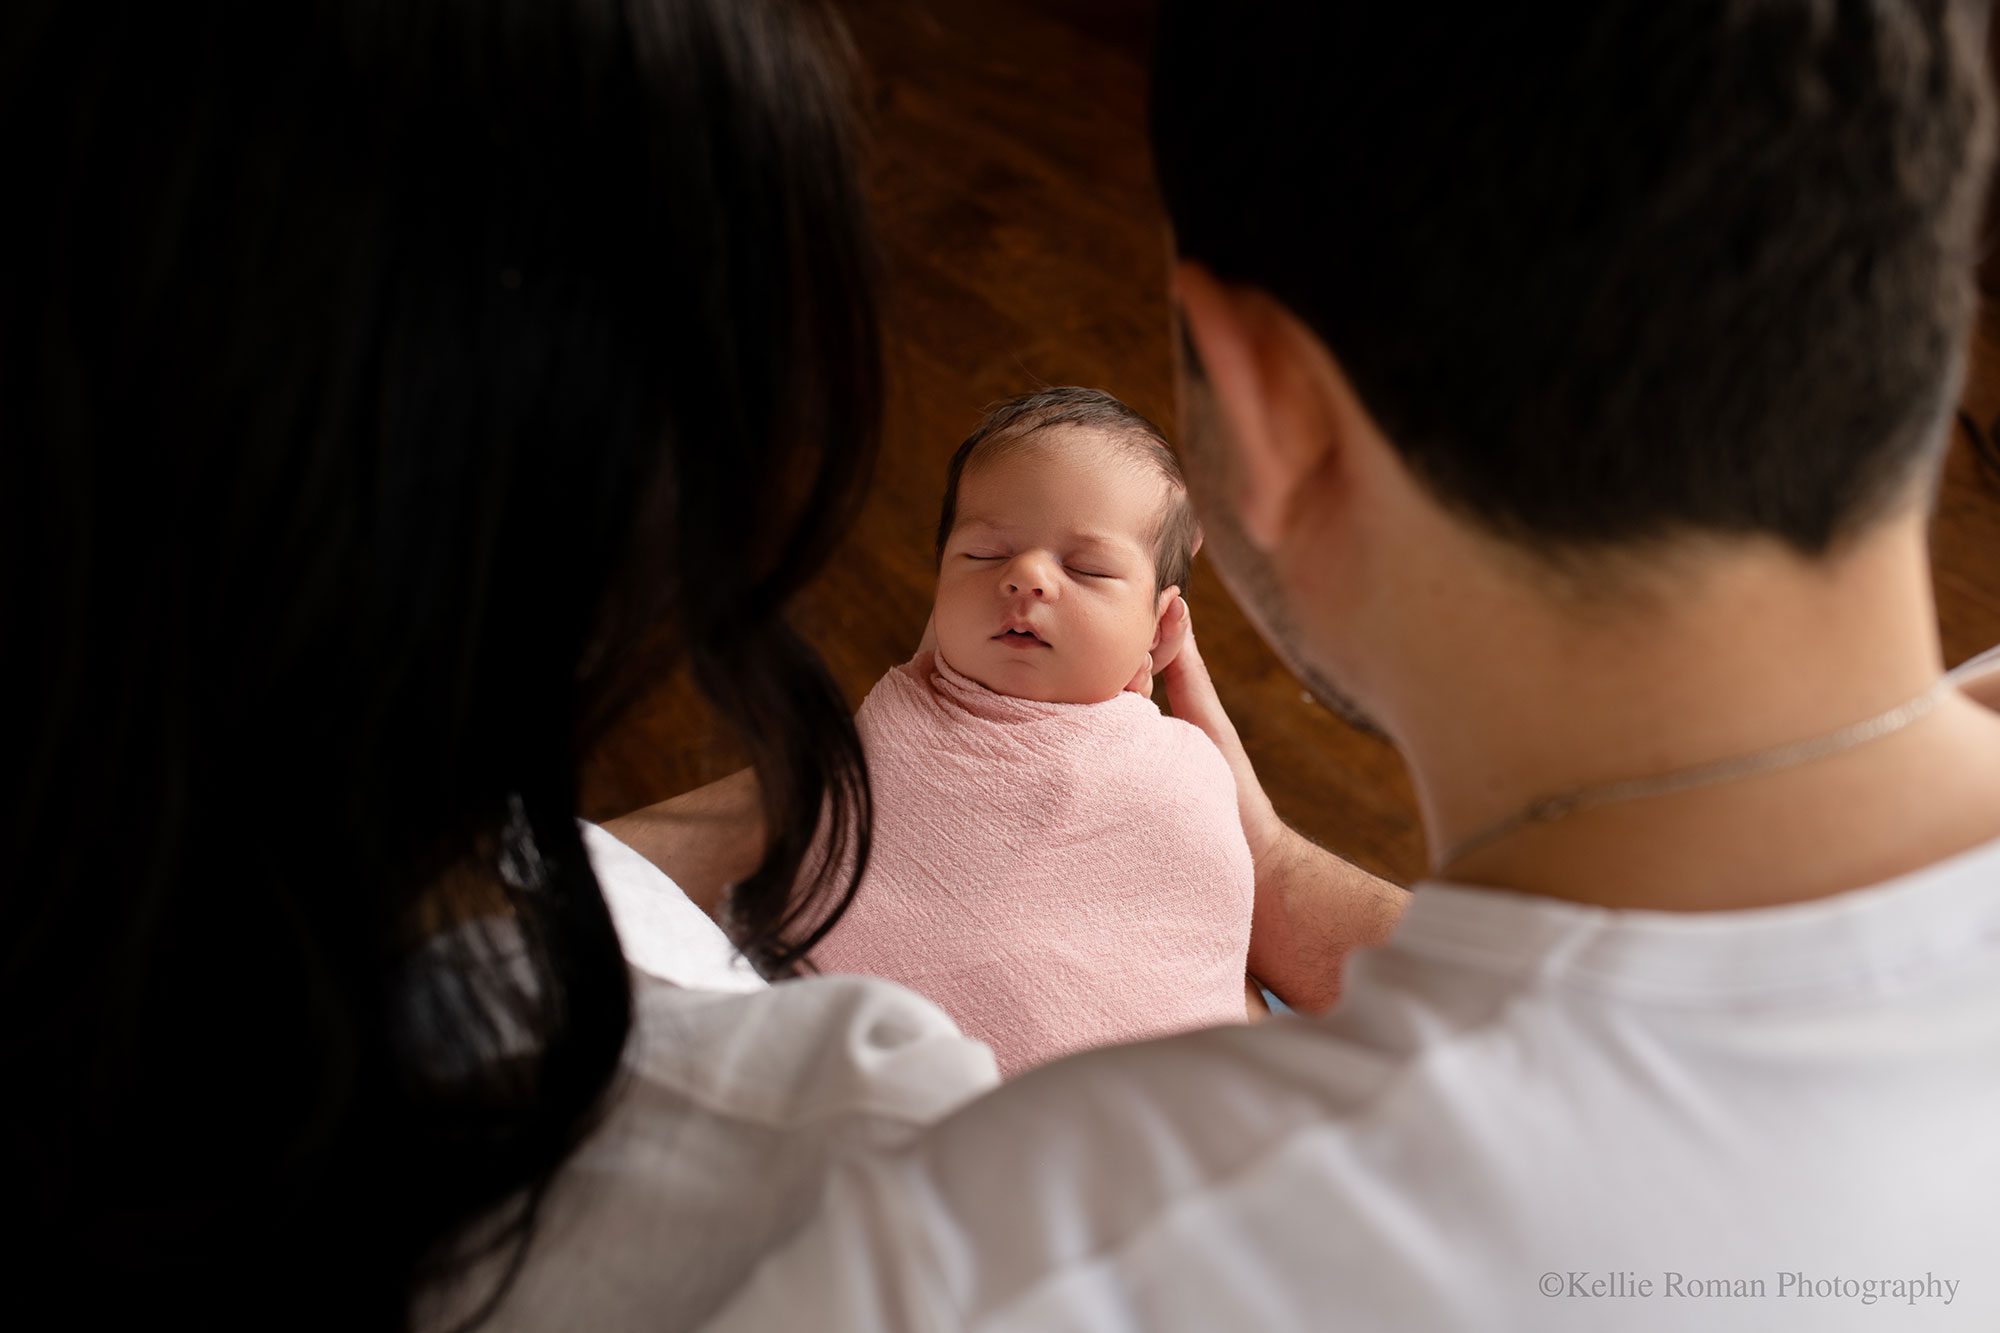 stunning newborn session. the back of the heads of women and man. you see through their heads and they are holding their newborn daughter who's in a pink swaddle wrap. 
